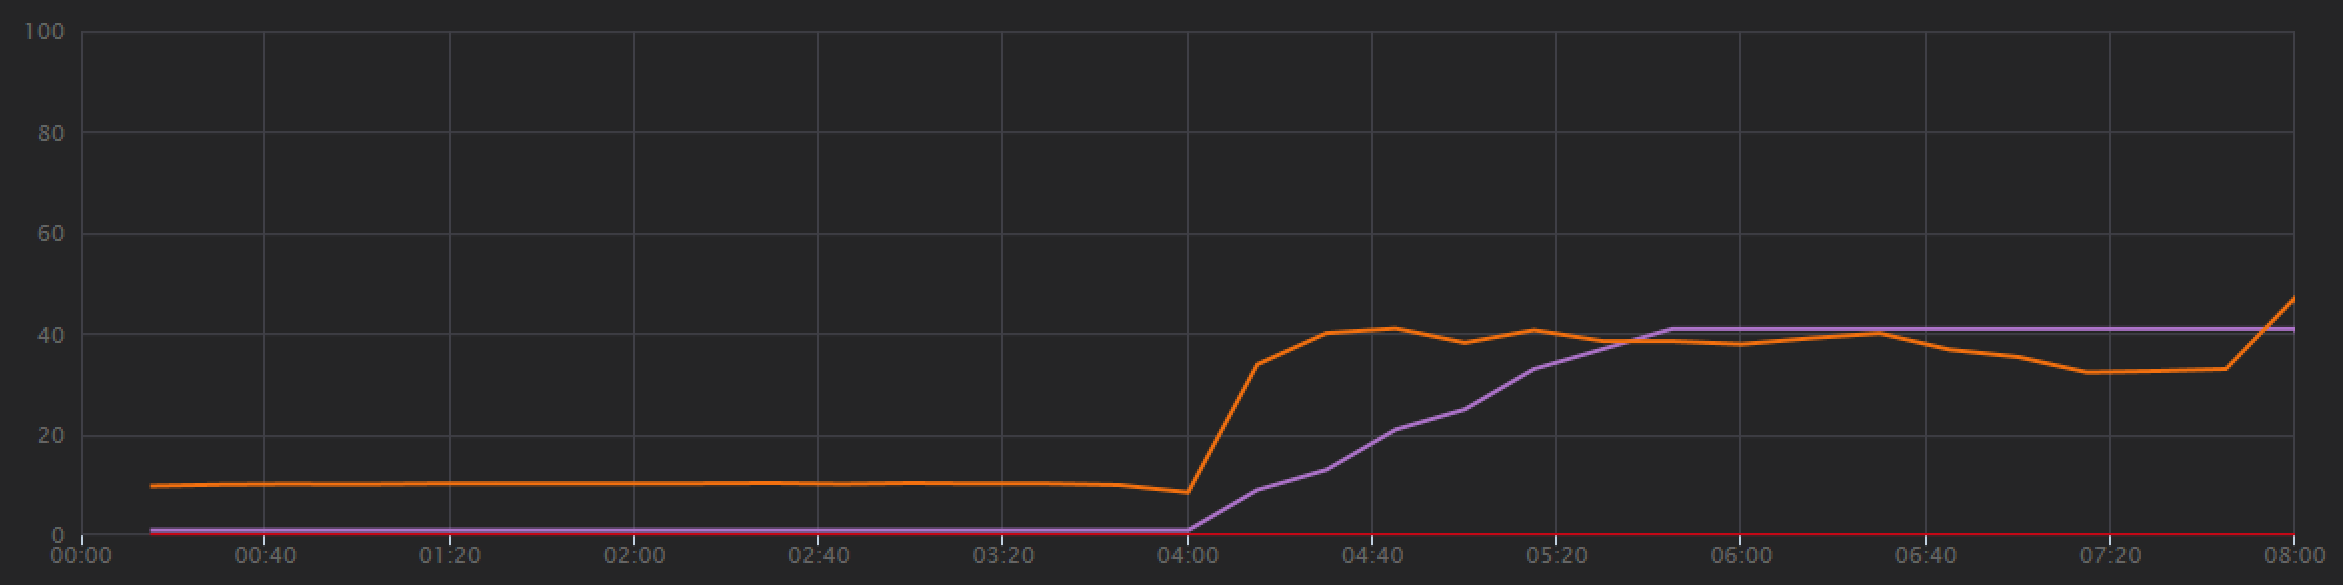 Graph of Visual Studio load test results showing more consistent throughput.